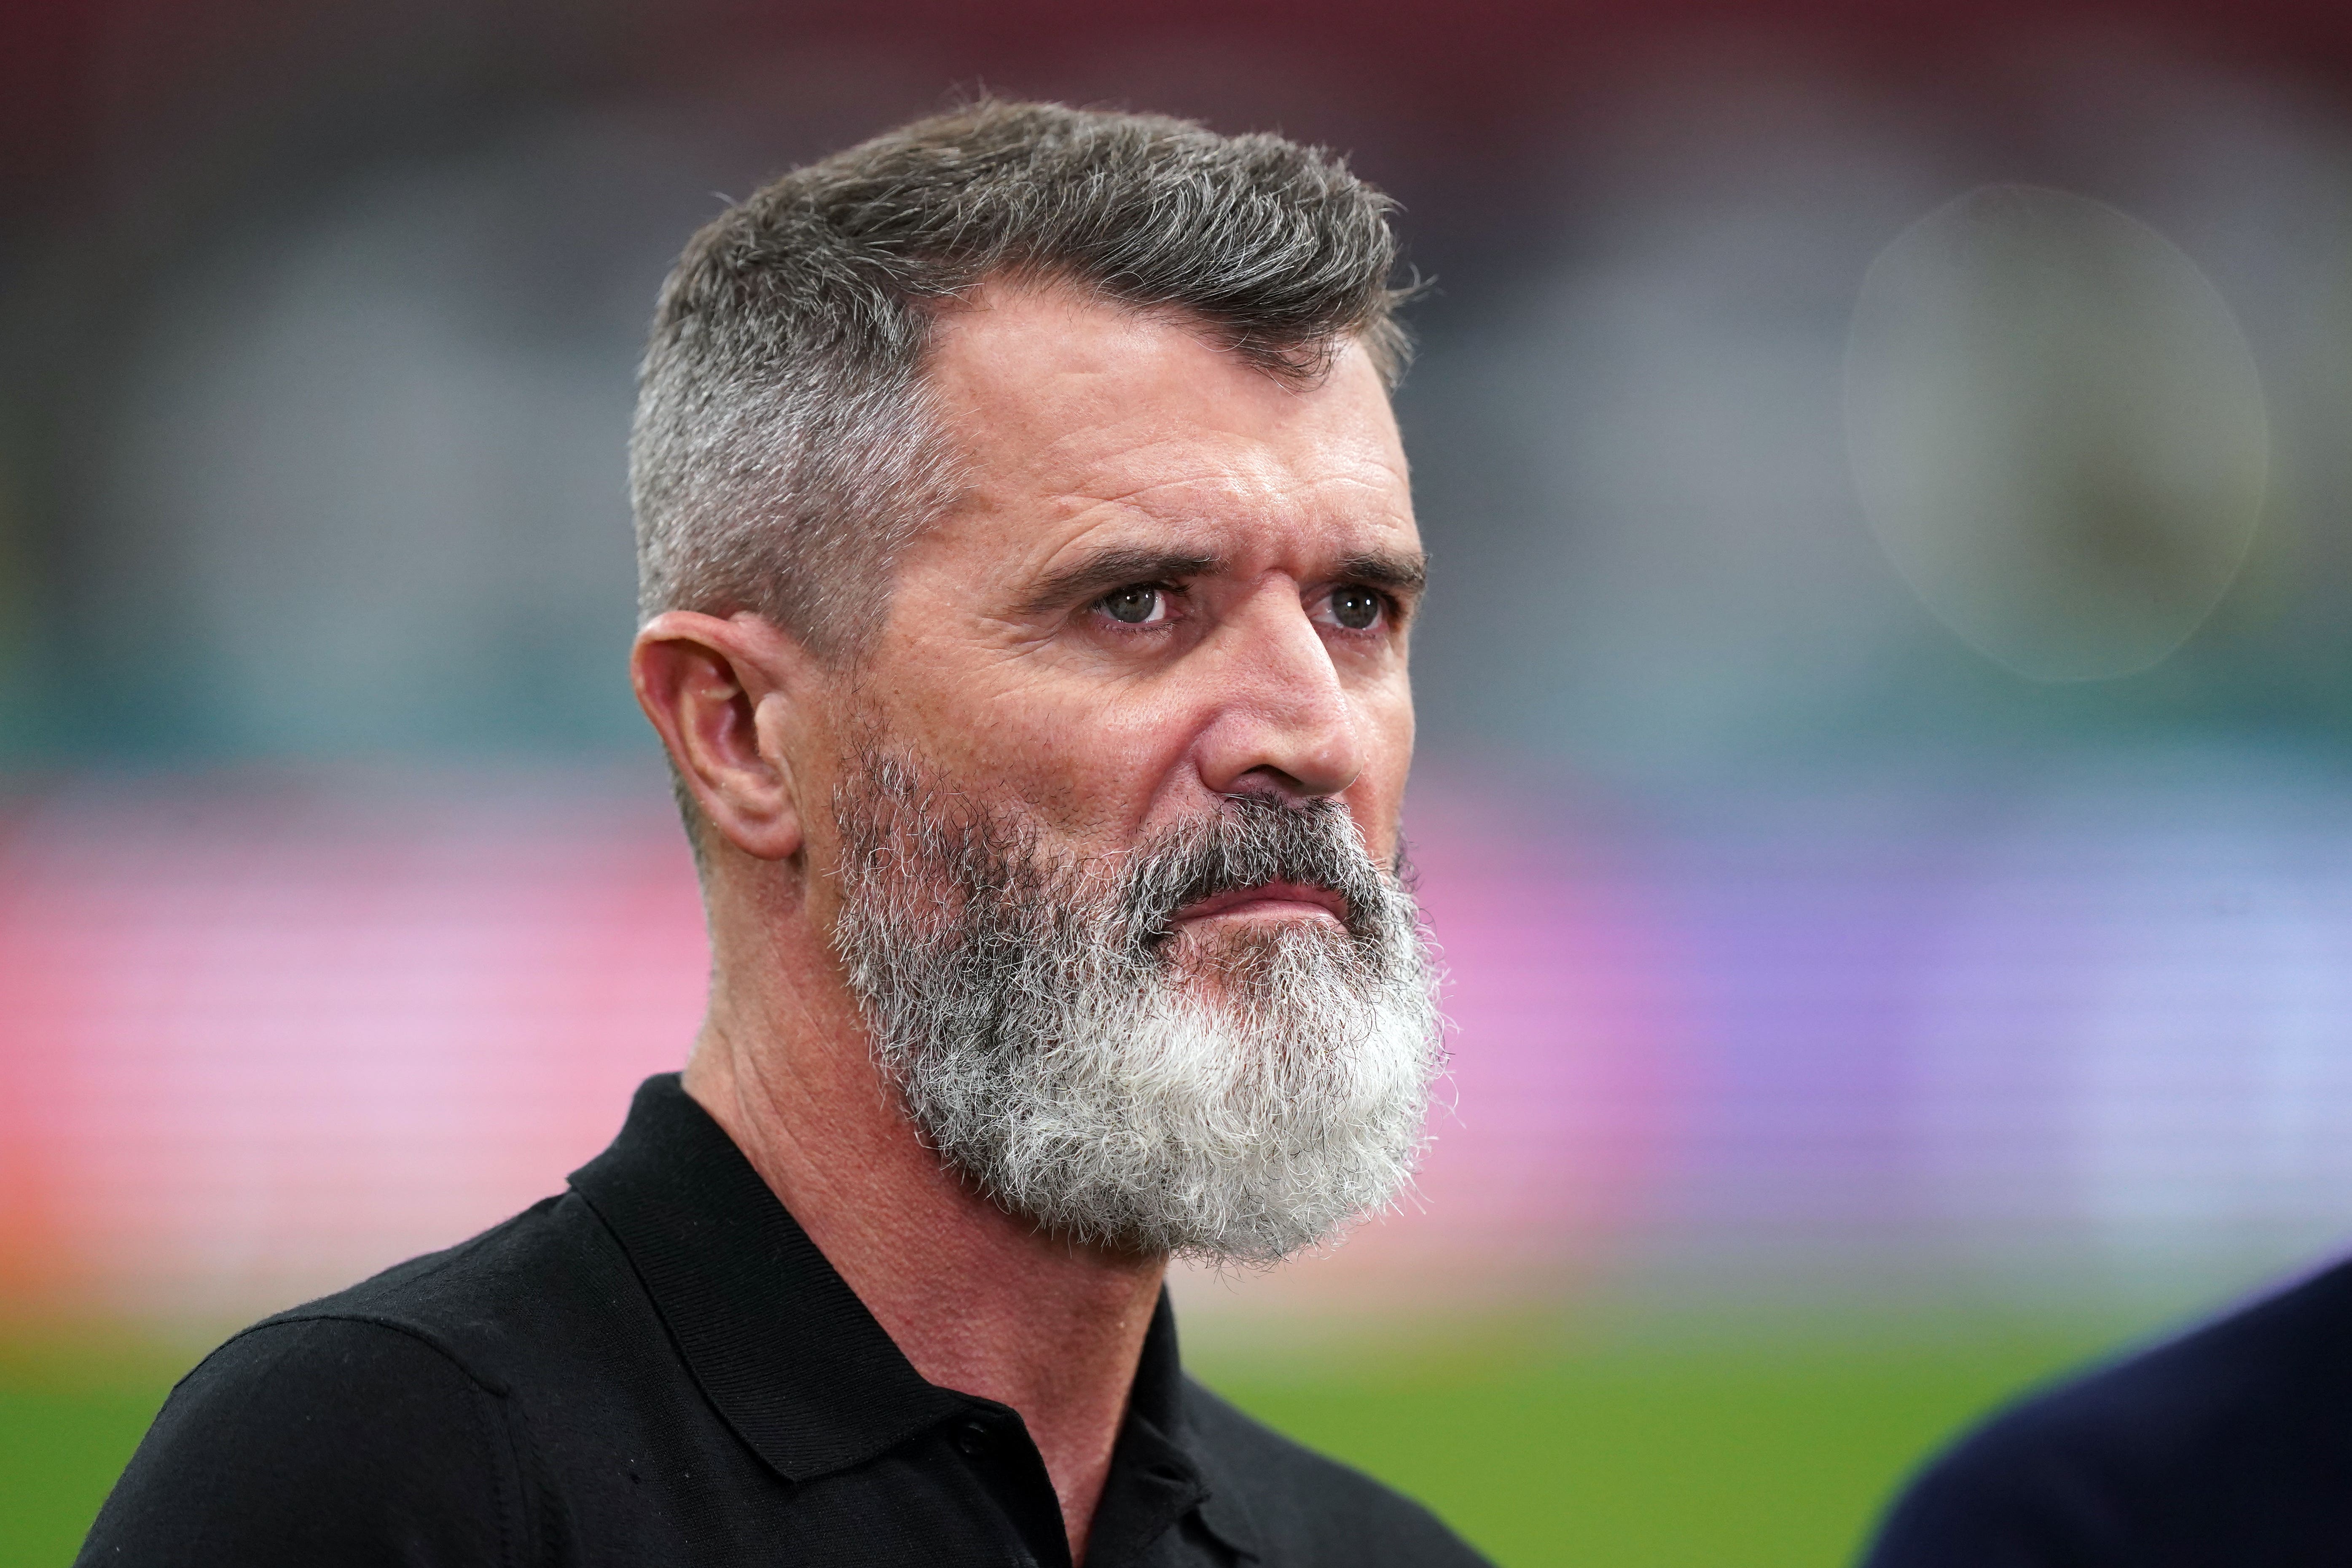 Following an alleged assault on Roy Keane at the Emirates, police have detained a 42-year-old man. | The Independent